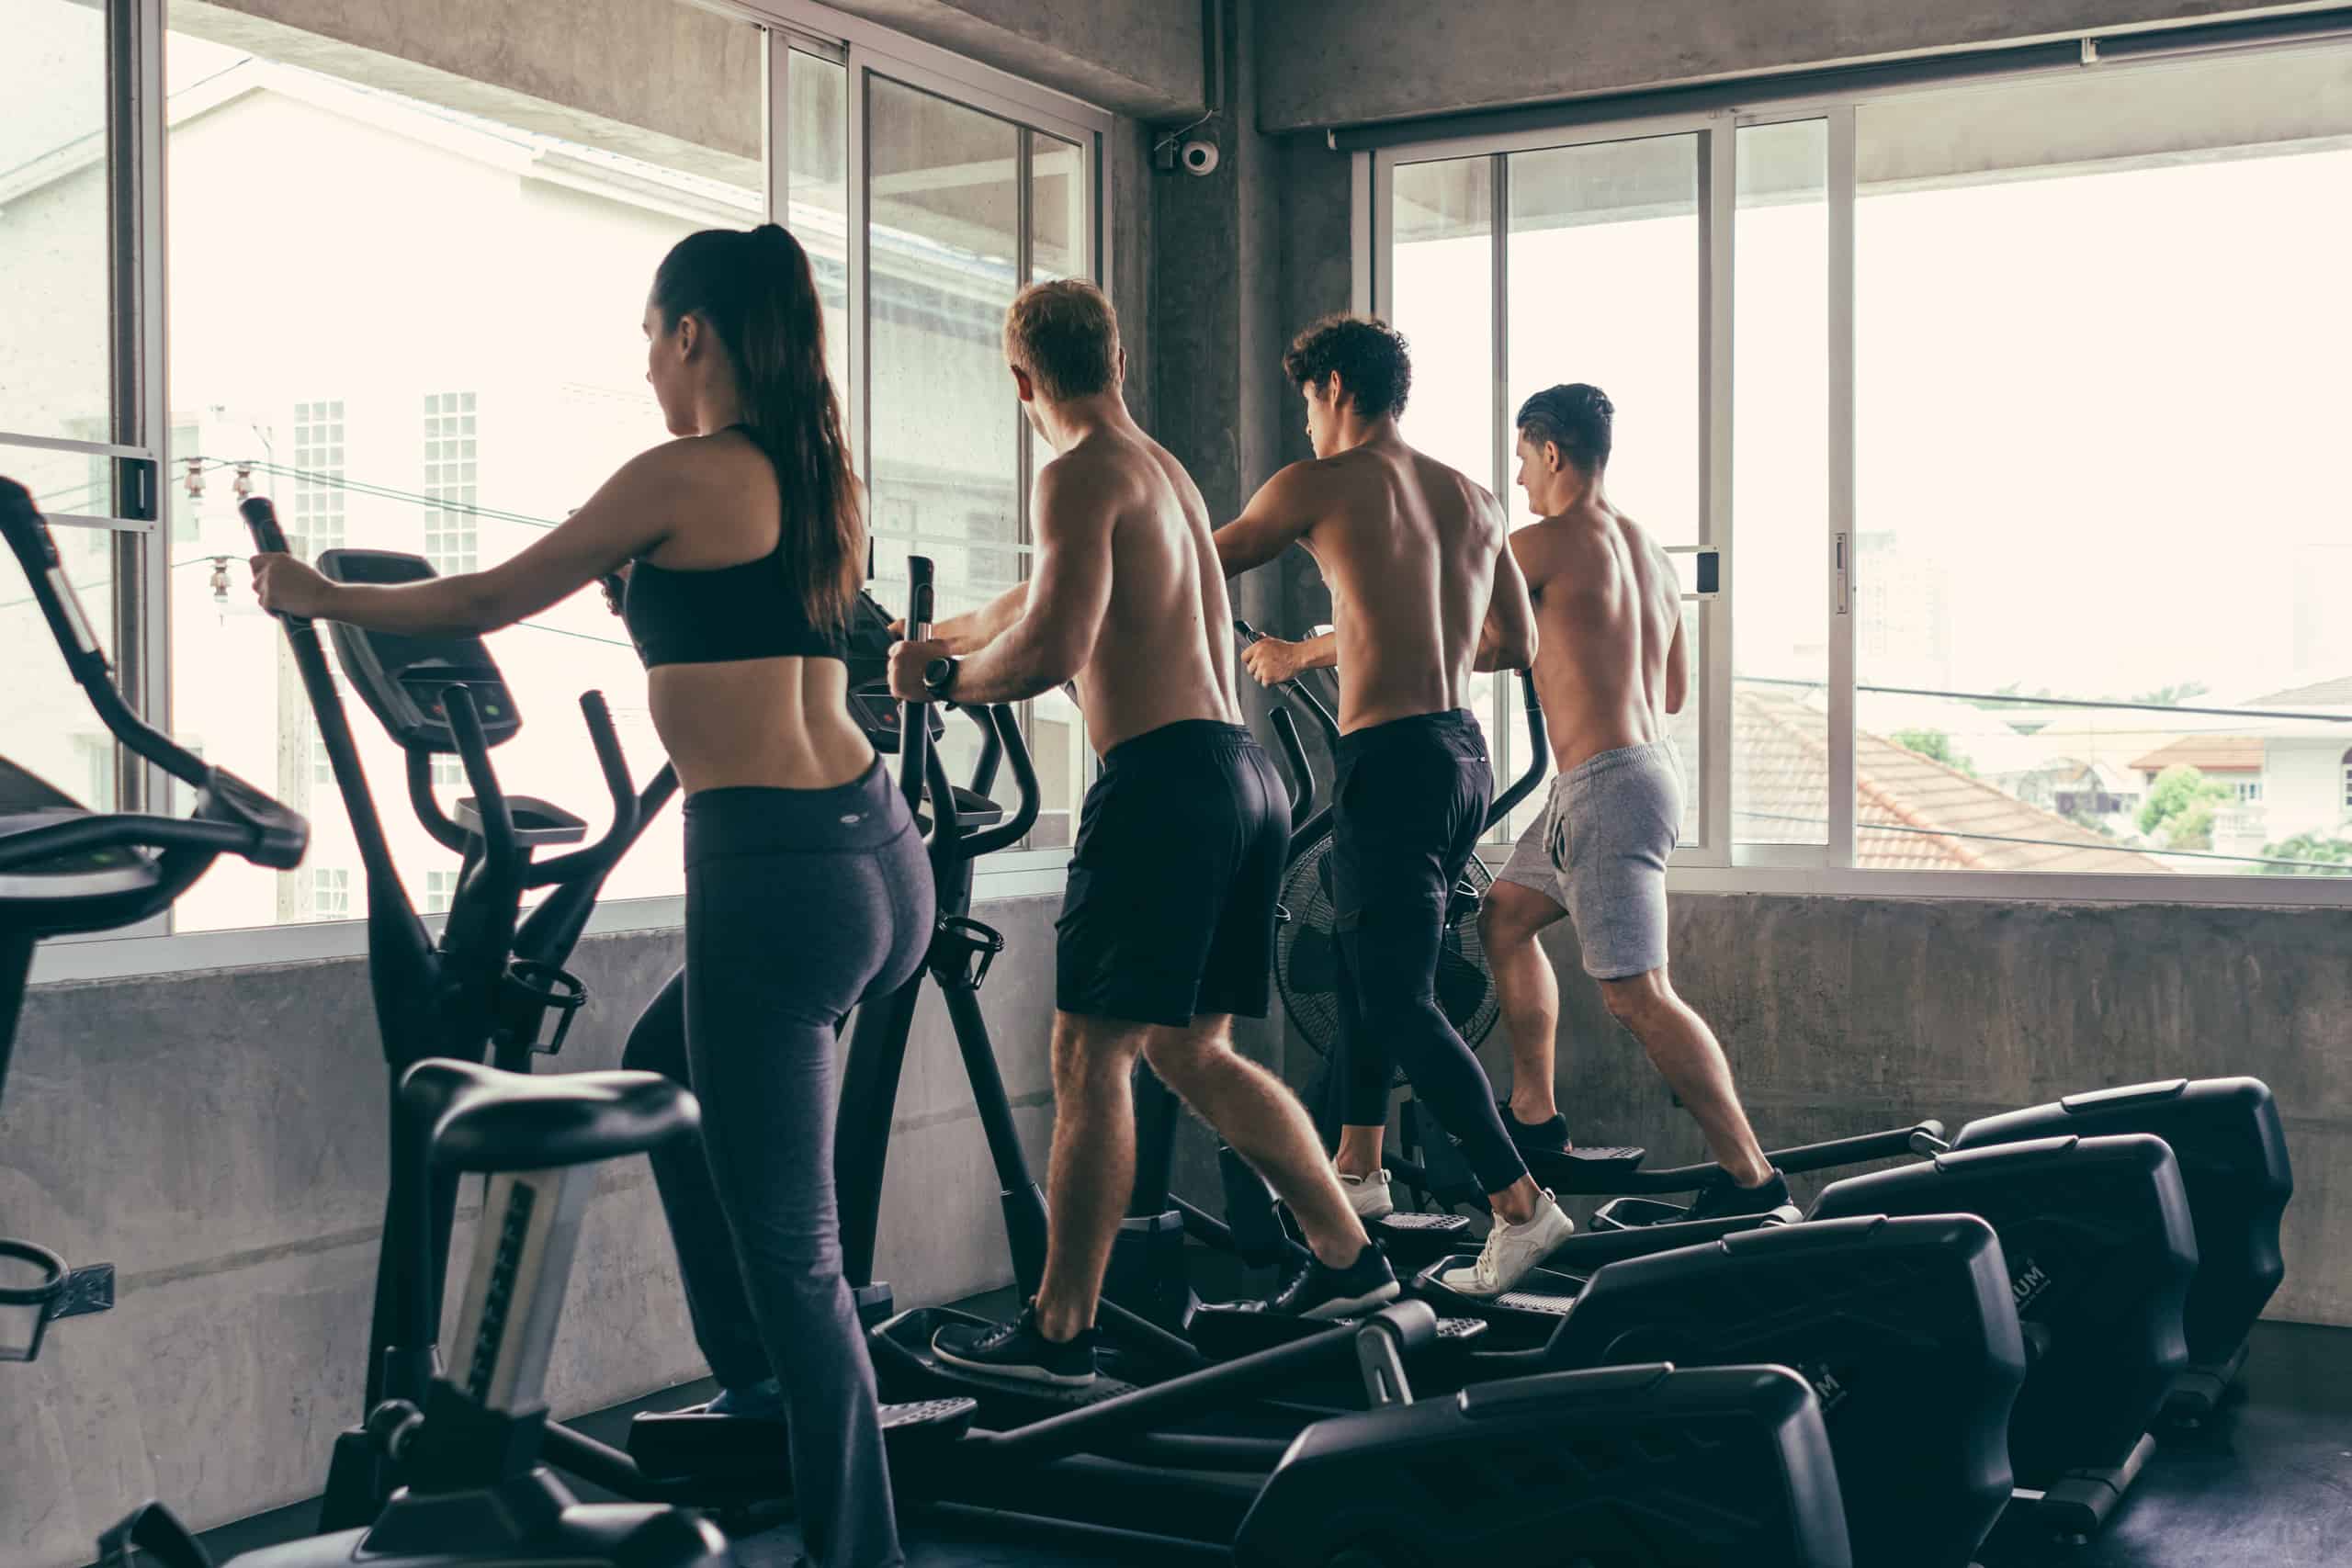 Experience the Magic of Elliptical Training for Back Pain Relief